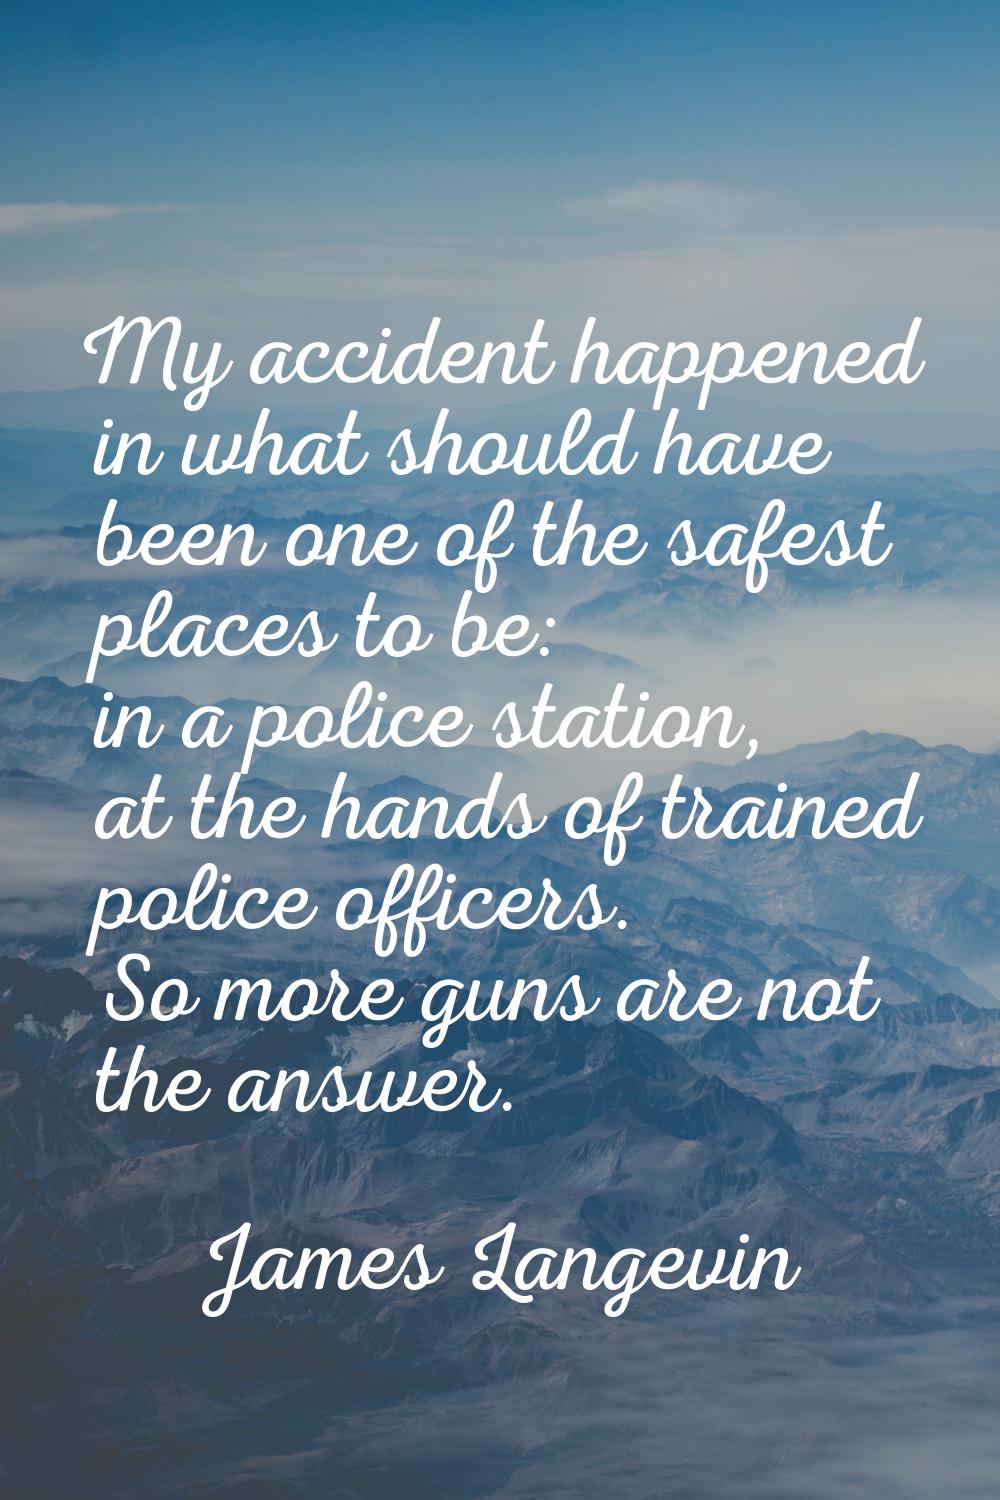 My accident happened in what should have been one of the safest places to be: in a police station, 